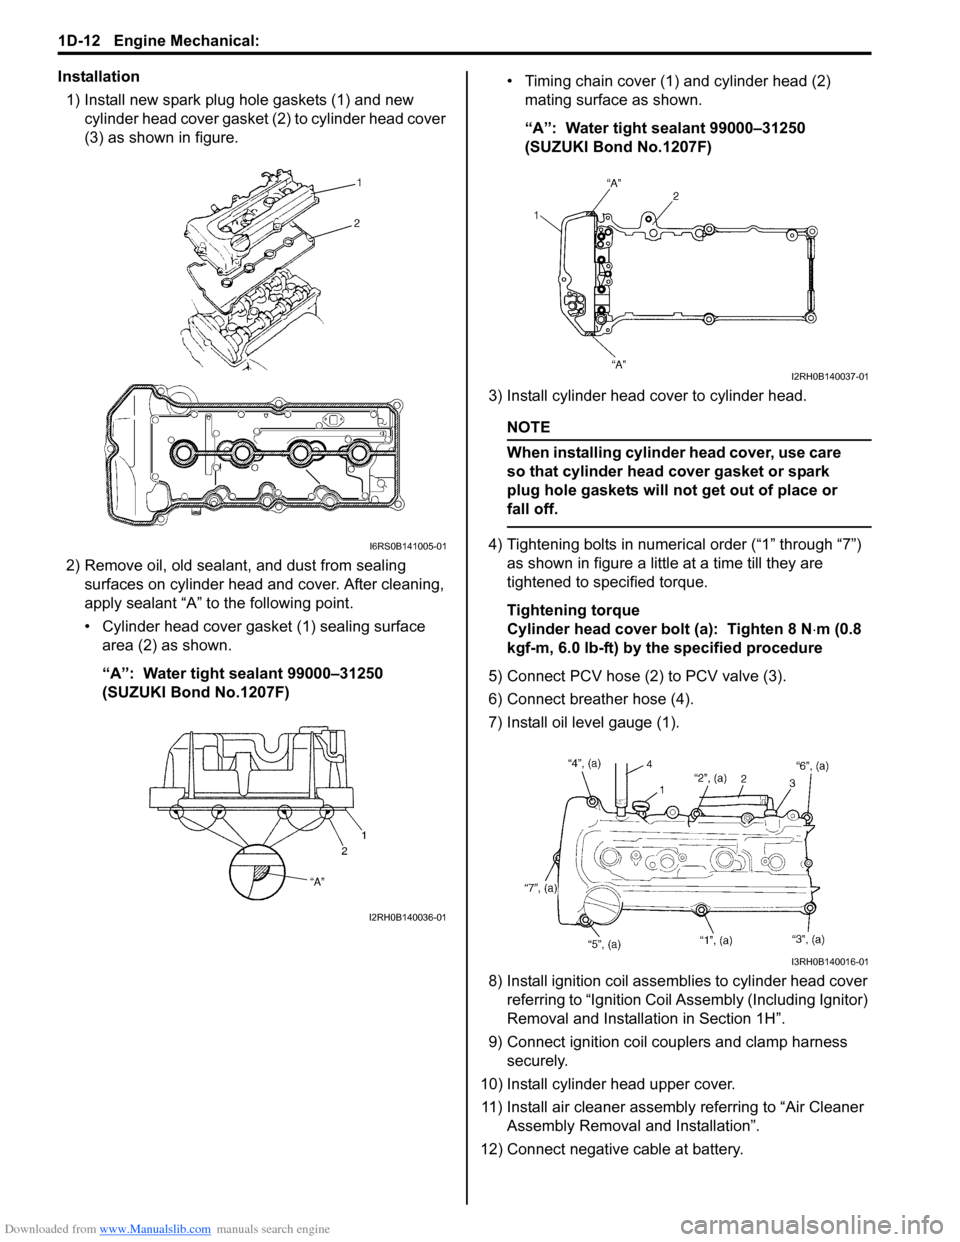 SUZUKI SX4 2006 1.G Service Owners Manual Downloaded from www.Manualslib.com manuals search engine 1D-12 Engine Mechanical: 
Installation
1) Install new spark plug hole gaskets (1) and new 
cylinder head cover gasket (2) to cylinder head cove